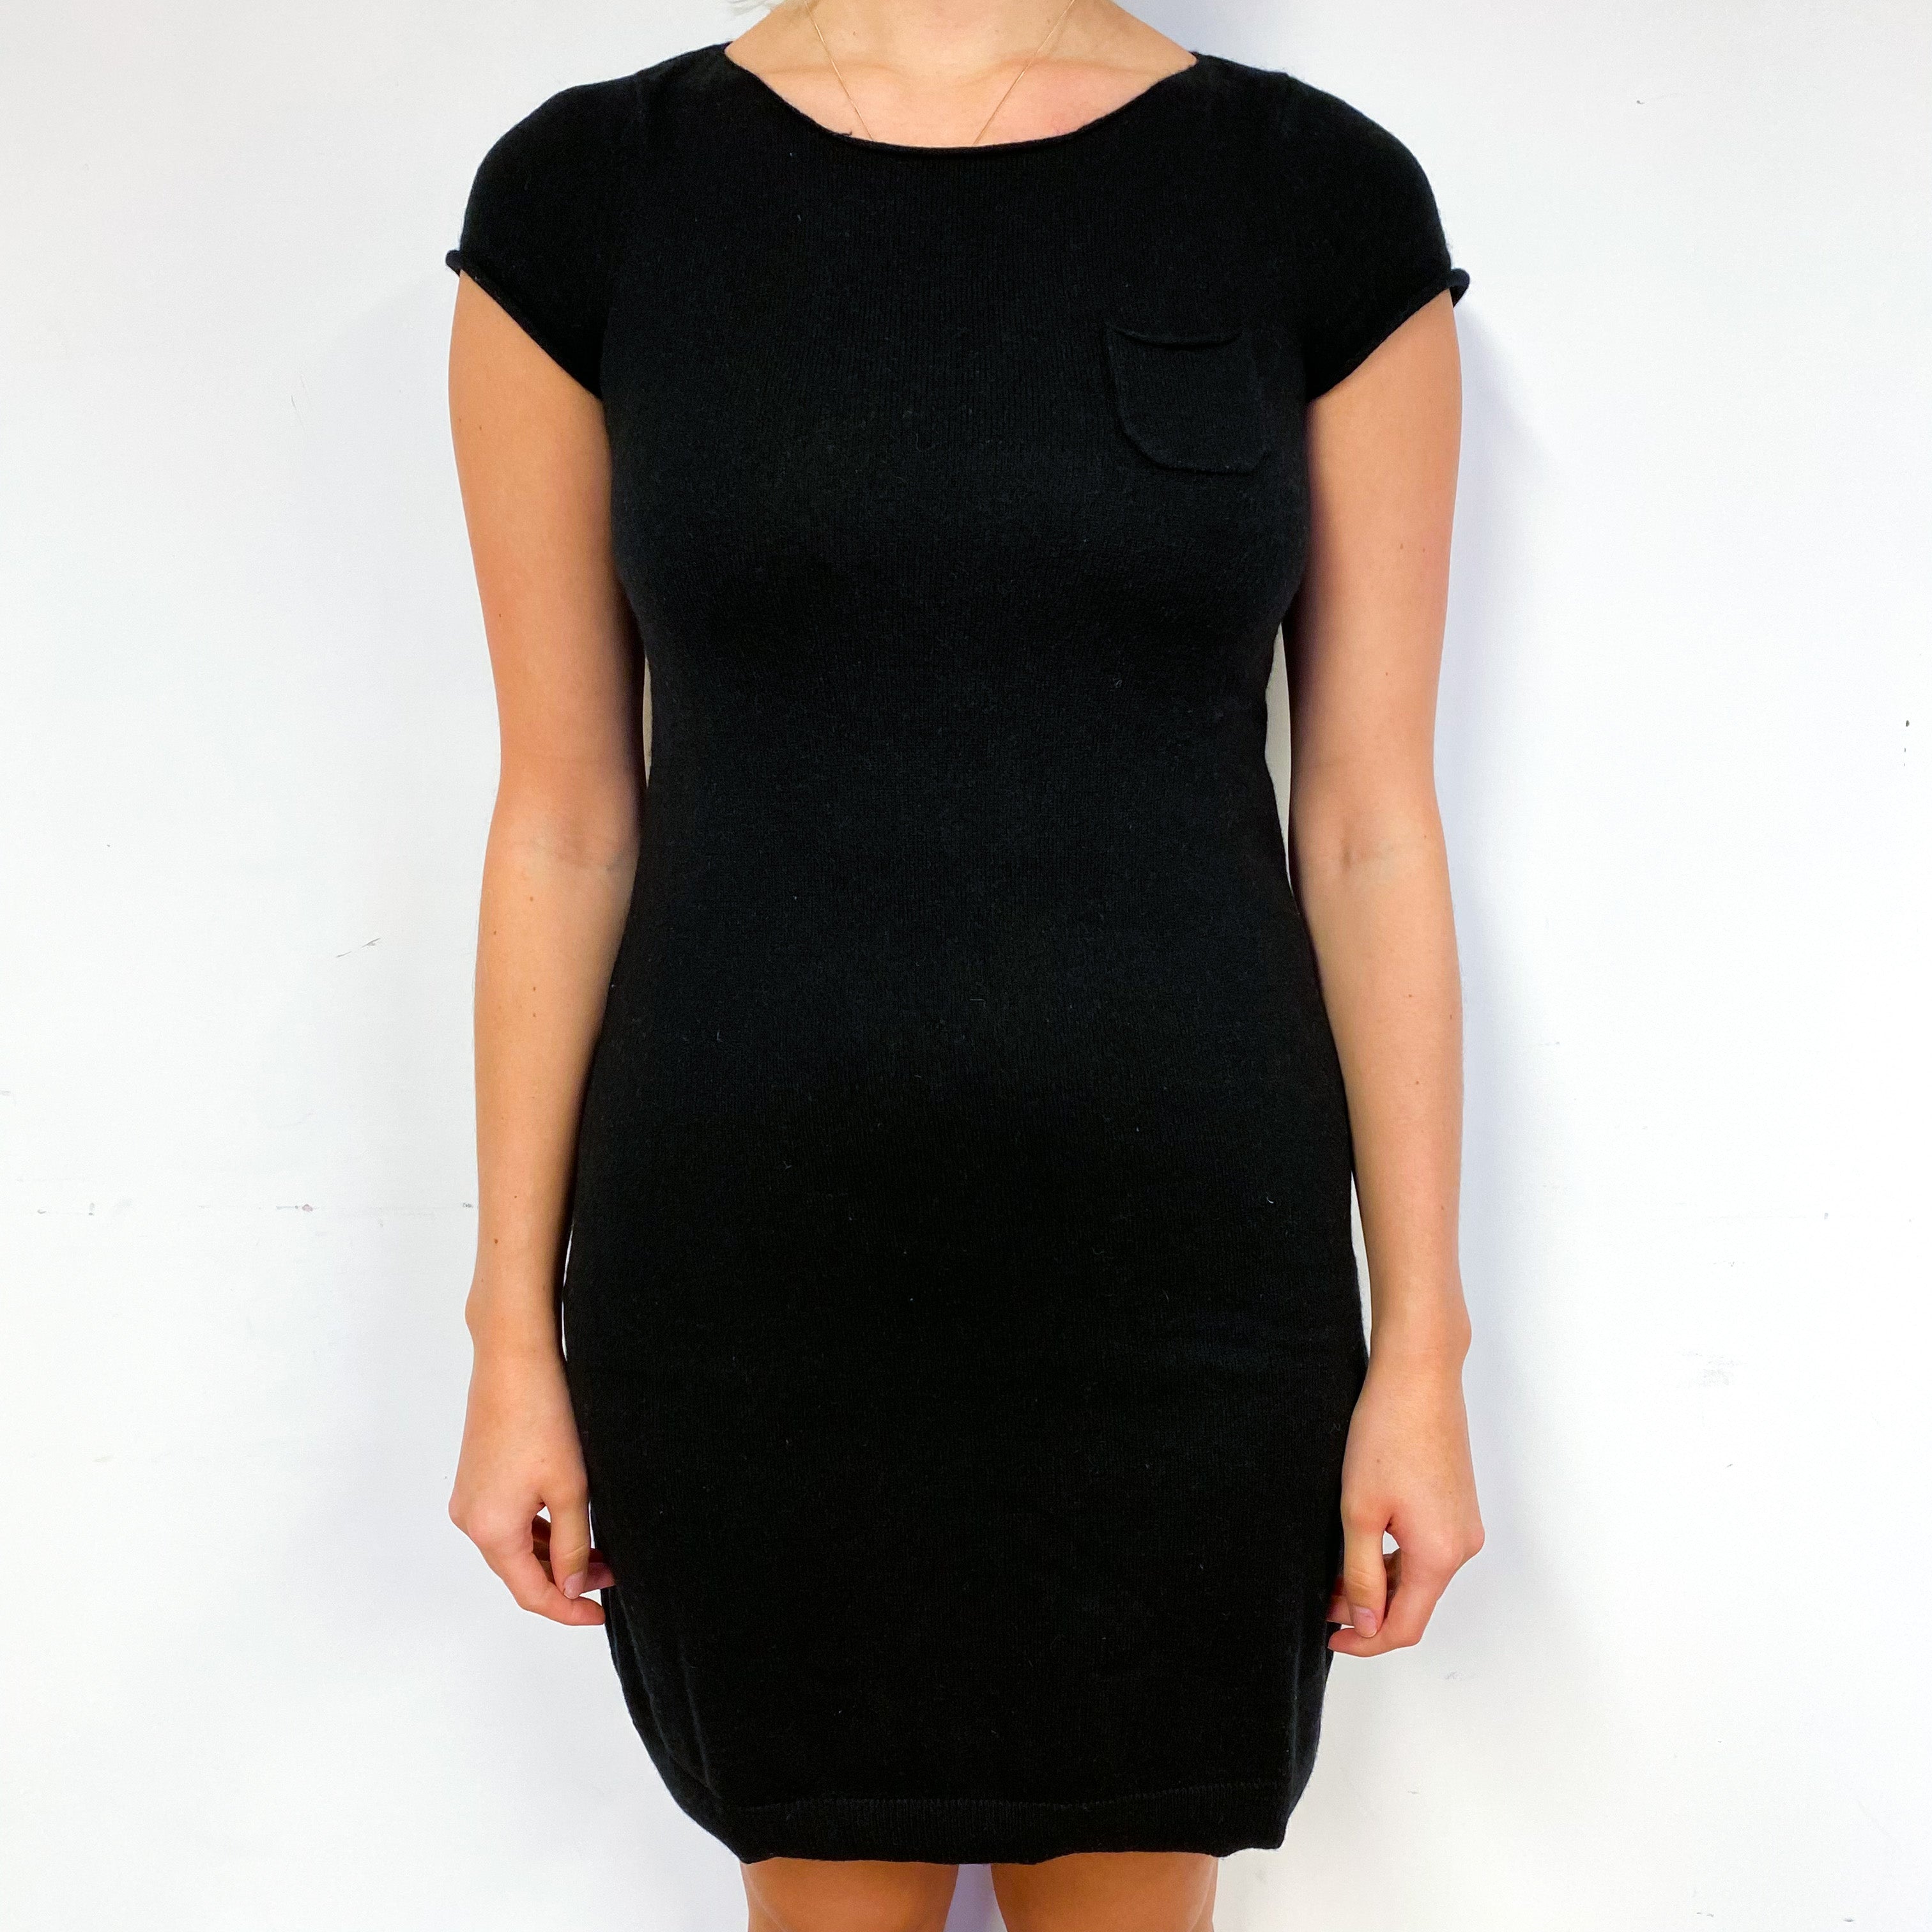 Black Capped Sleeved Dress Small